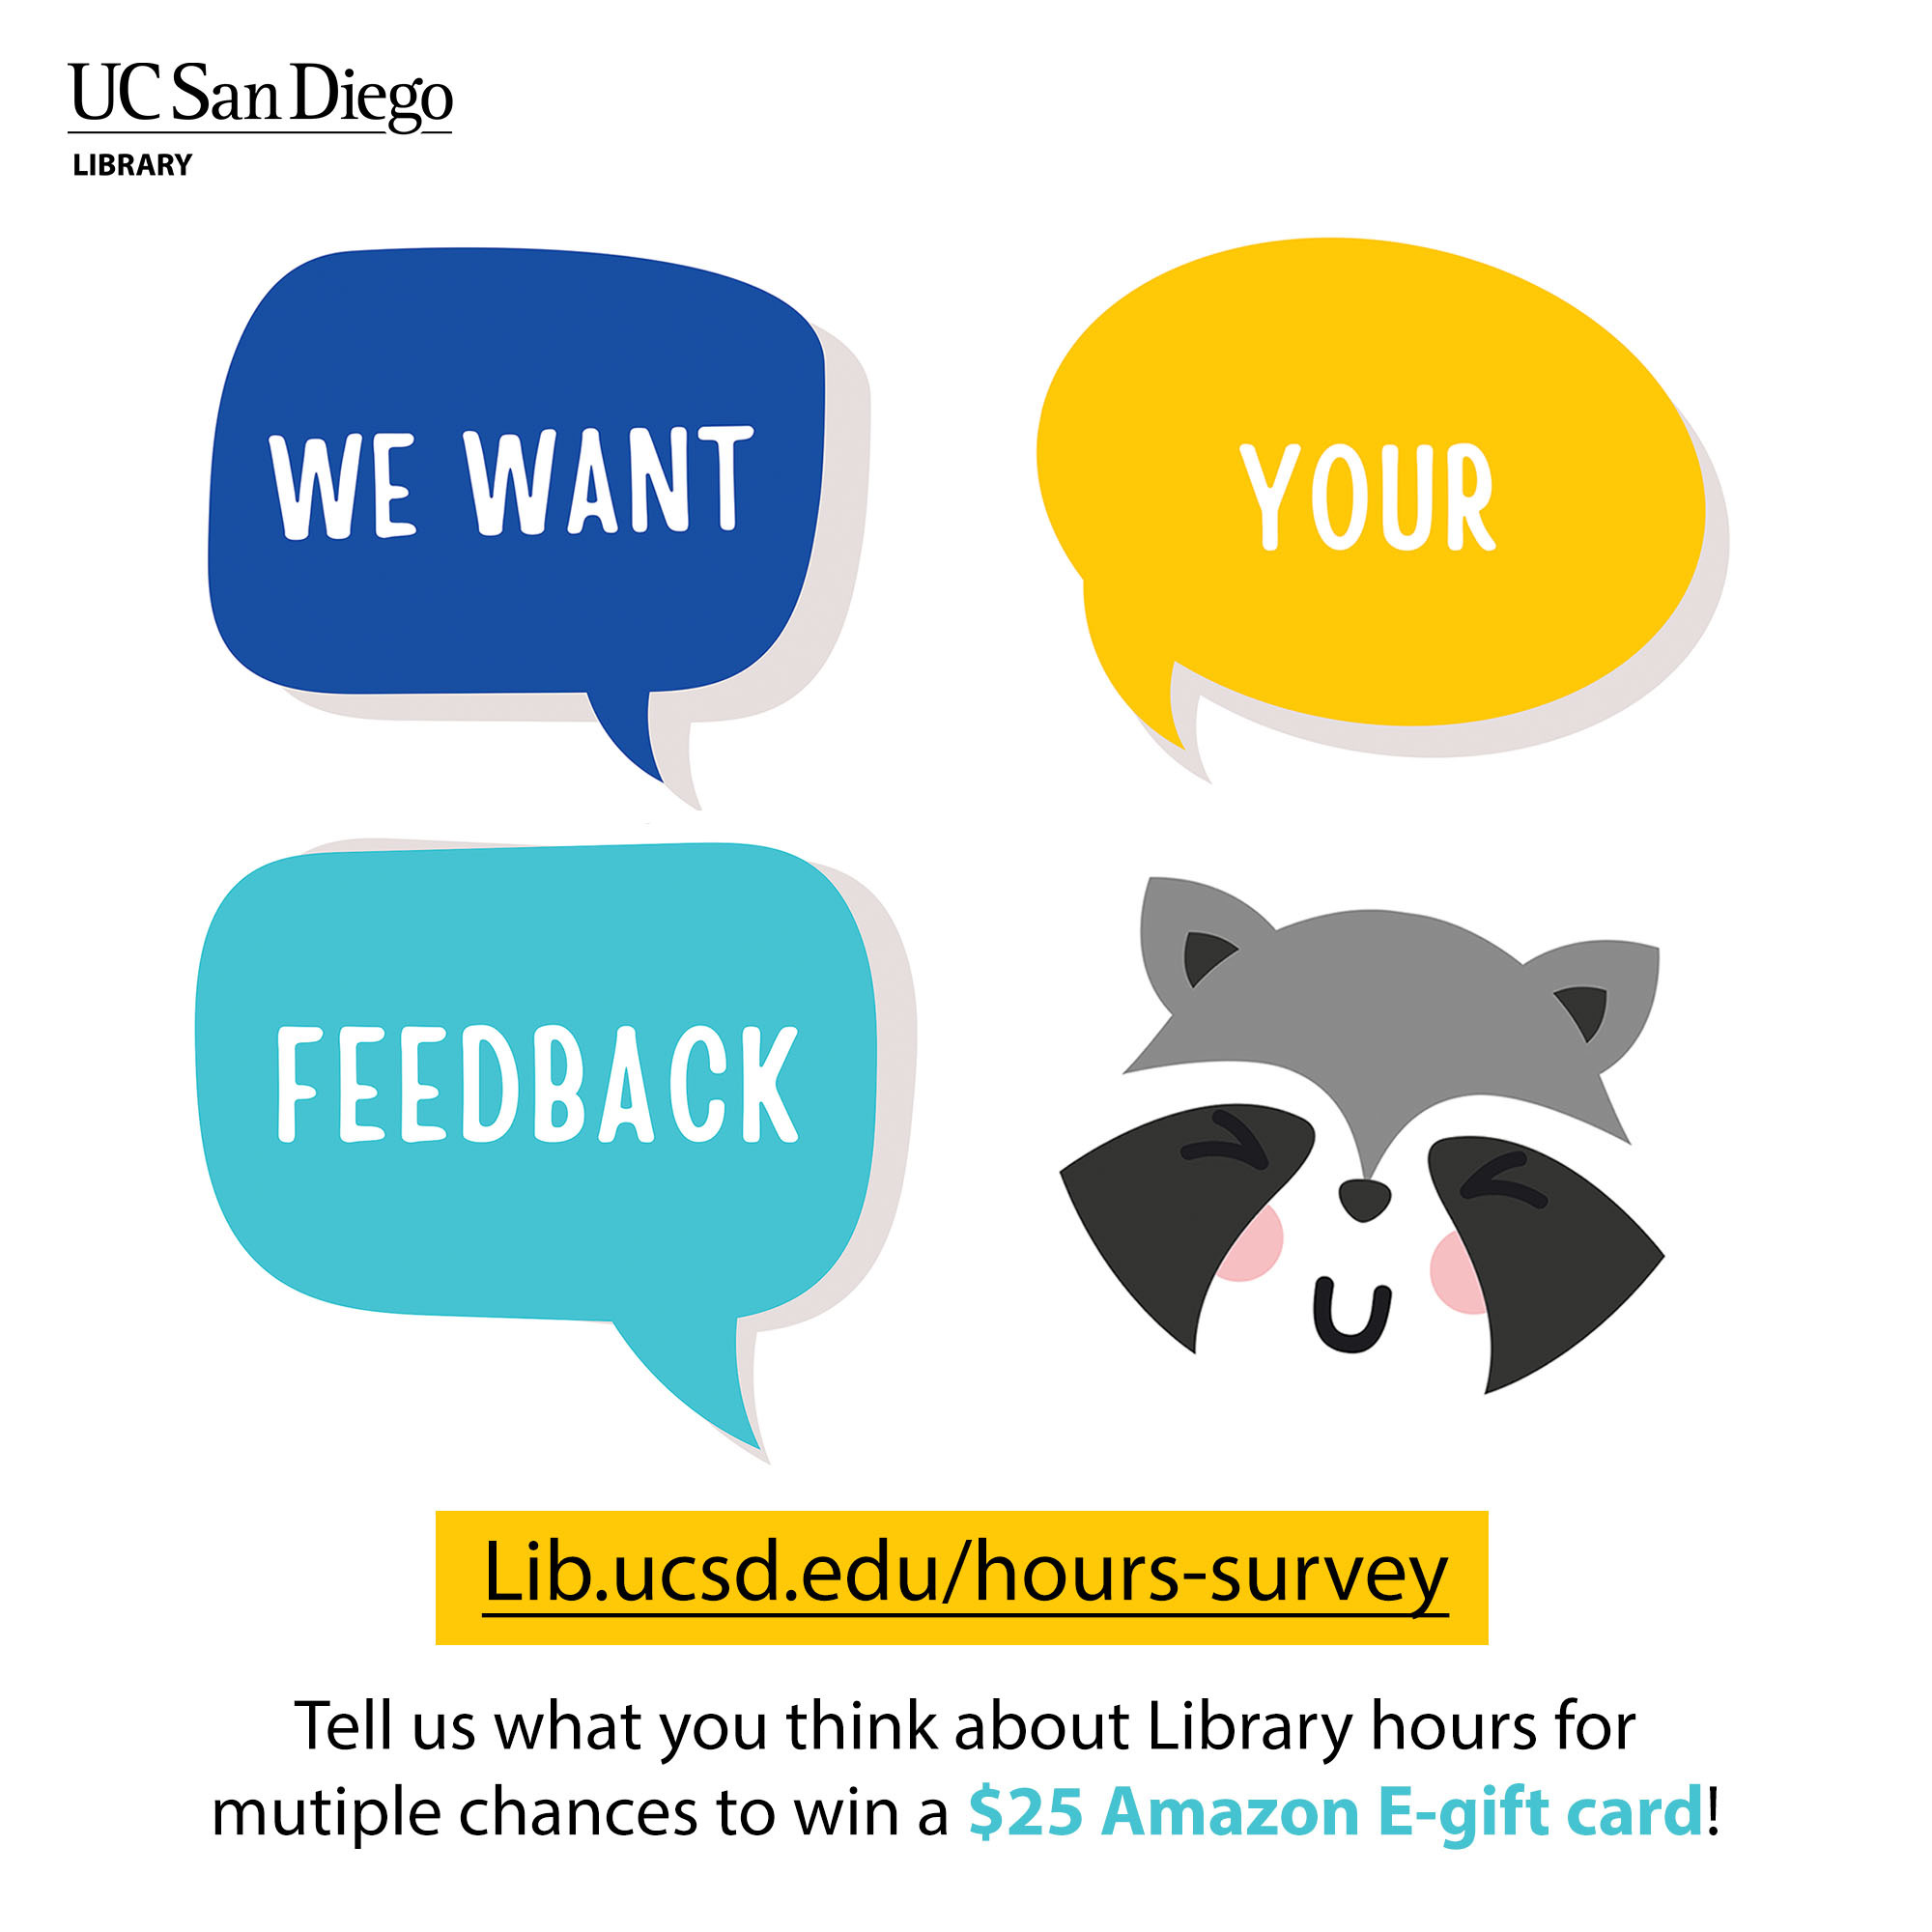 Link to service hours survey.